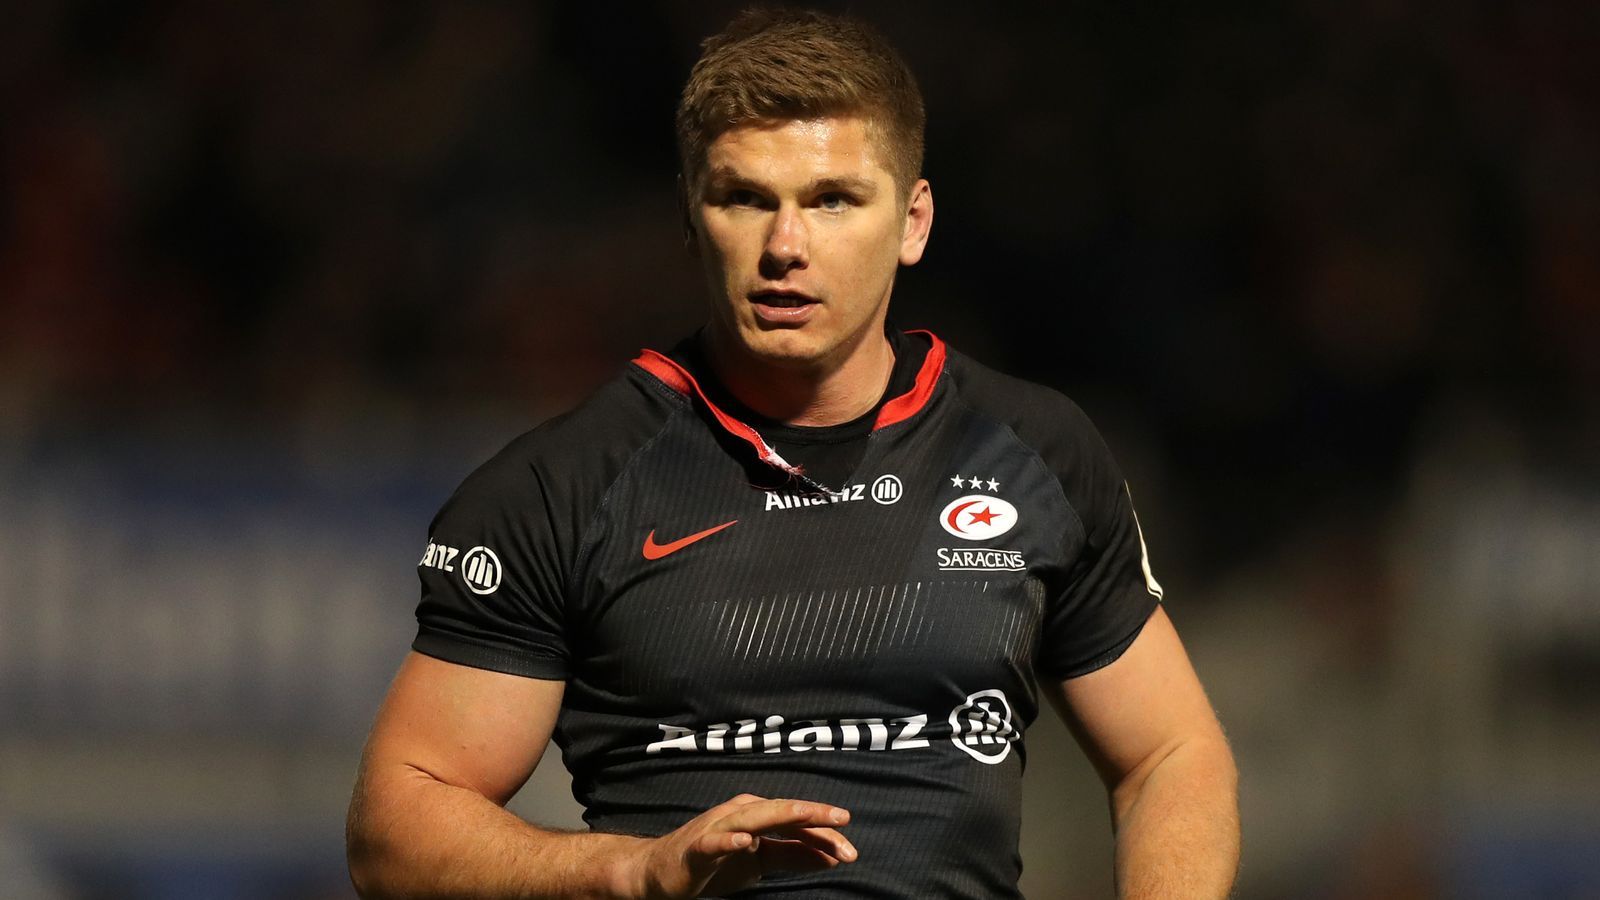 Owen Farrell is committed to the long term for the Saracens. Rugby Union News. FR24 News English